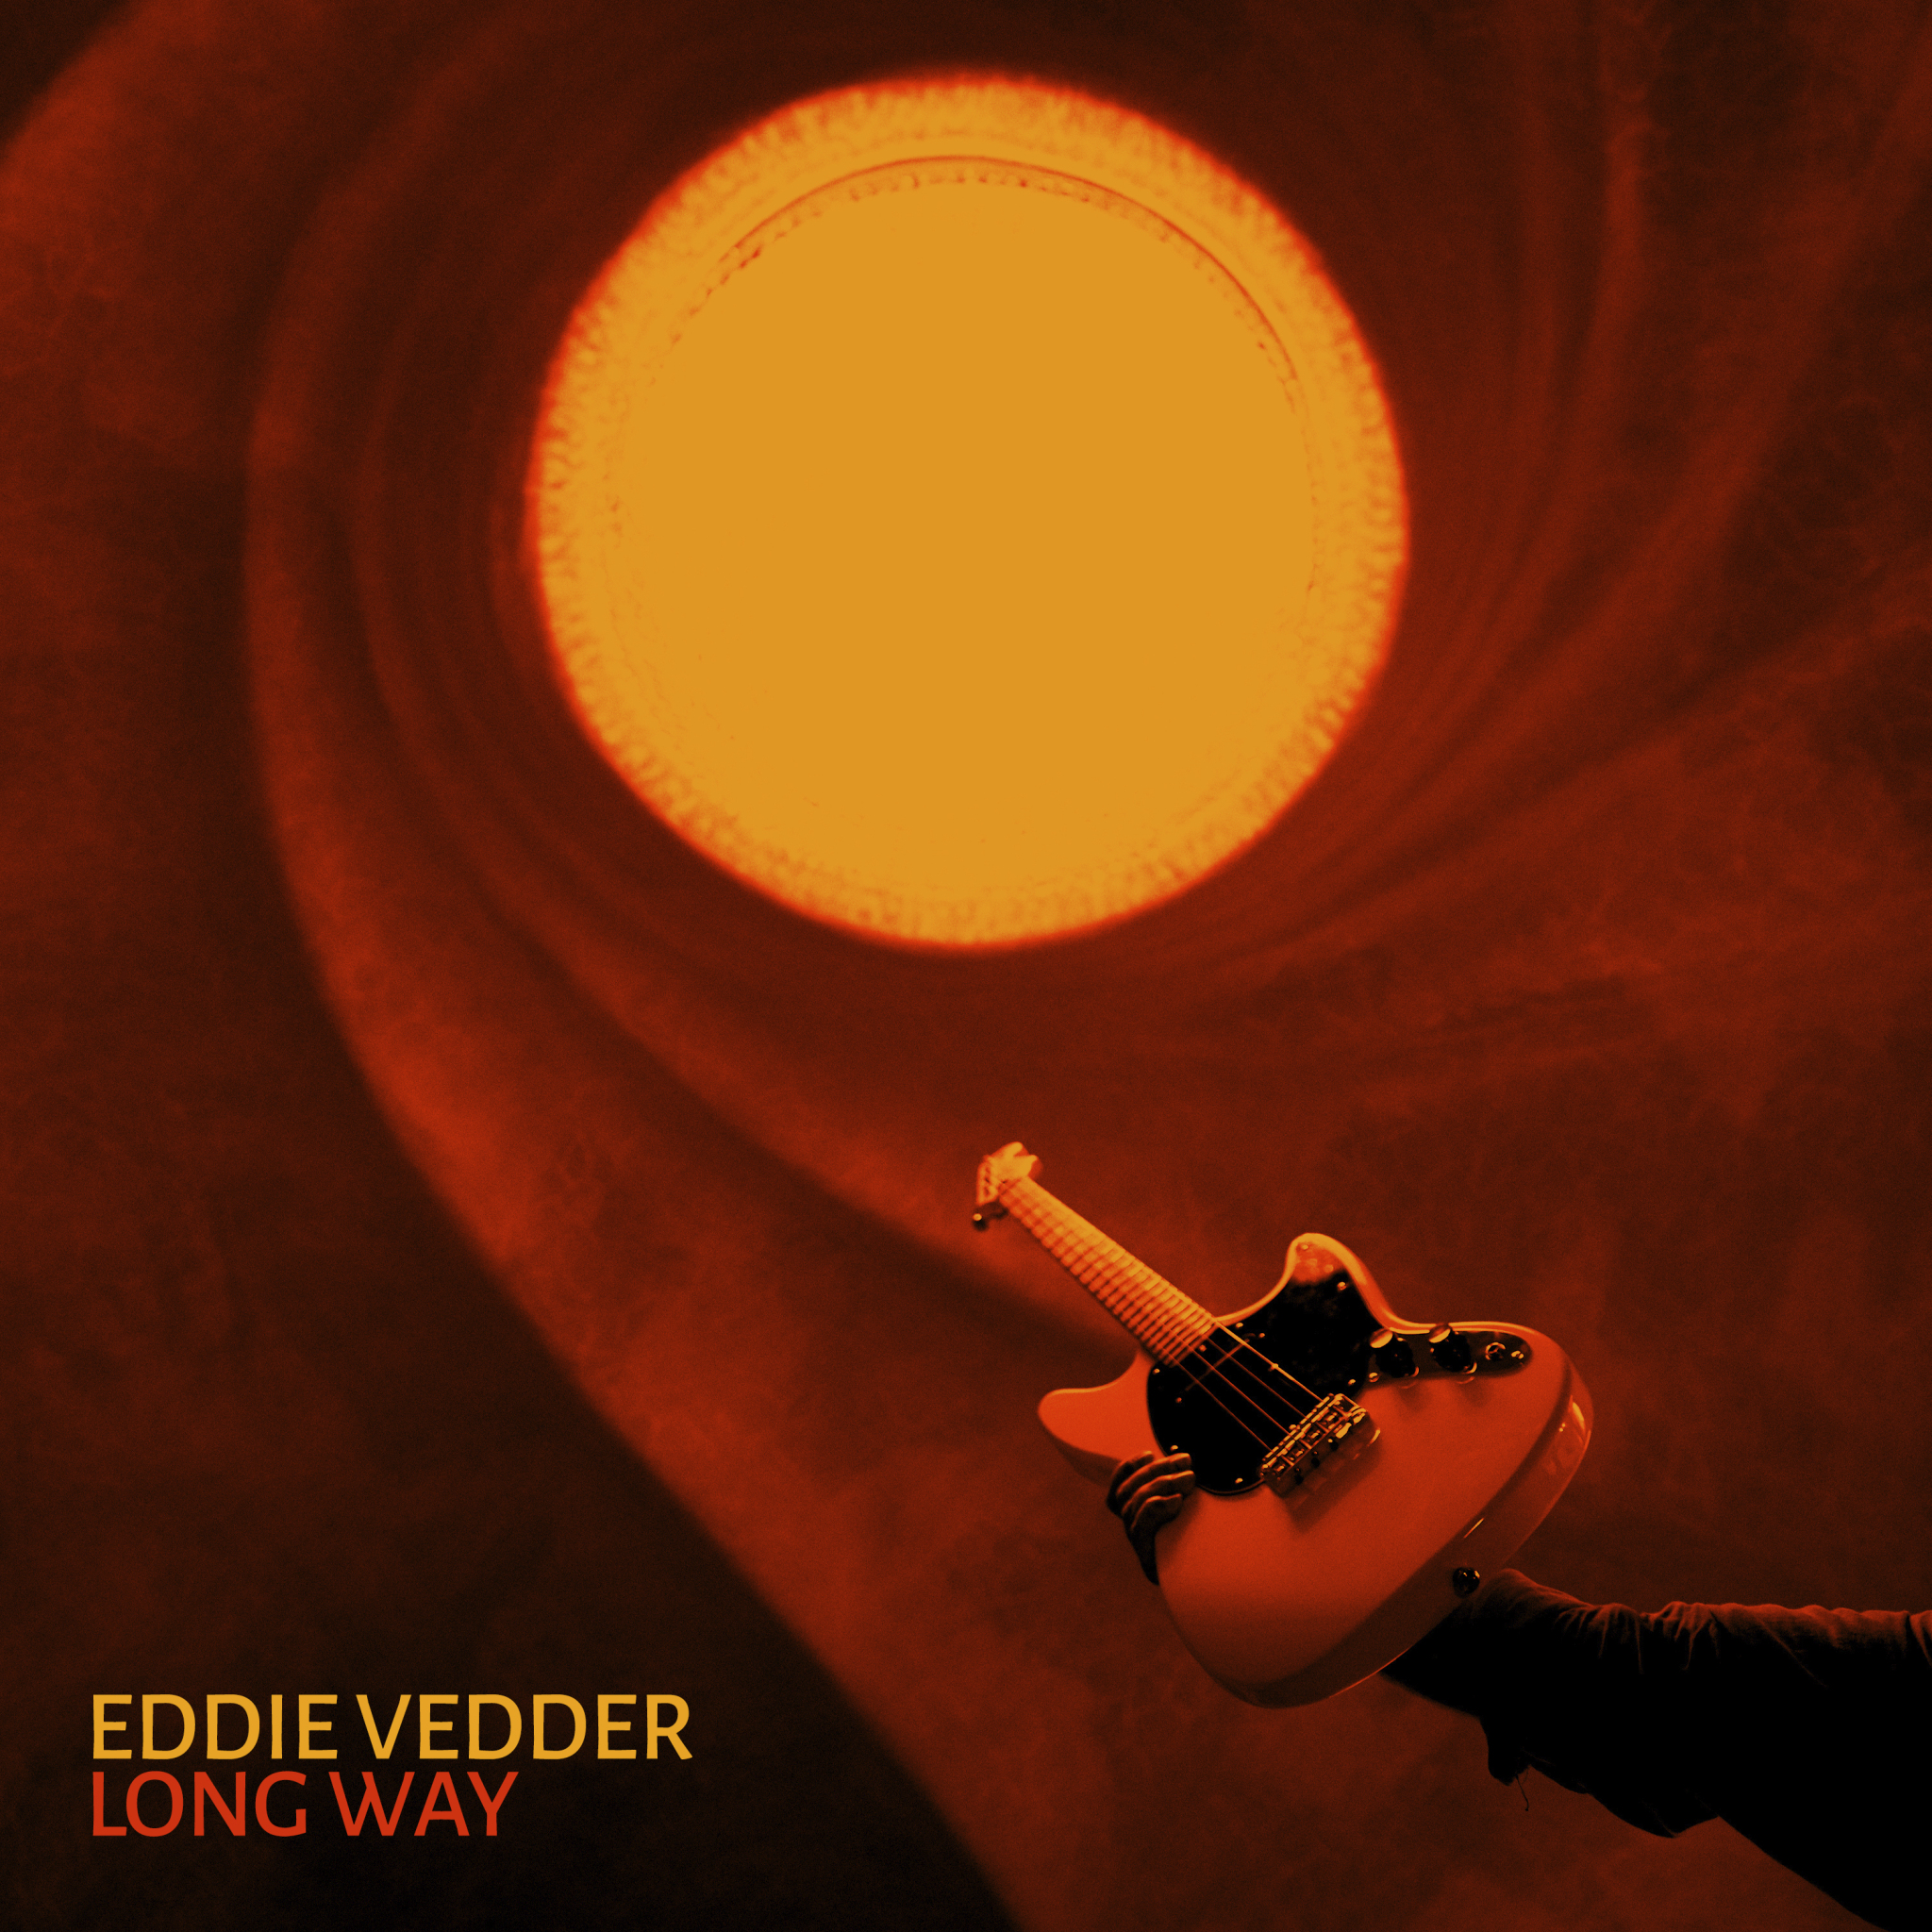 Eddie Vedder New Single "Long Way" out today